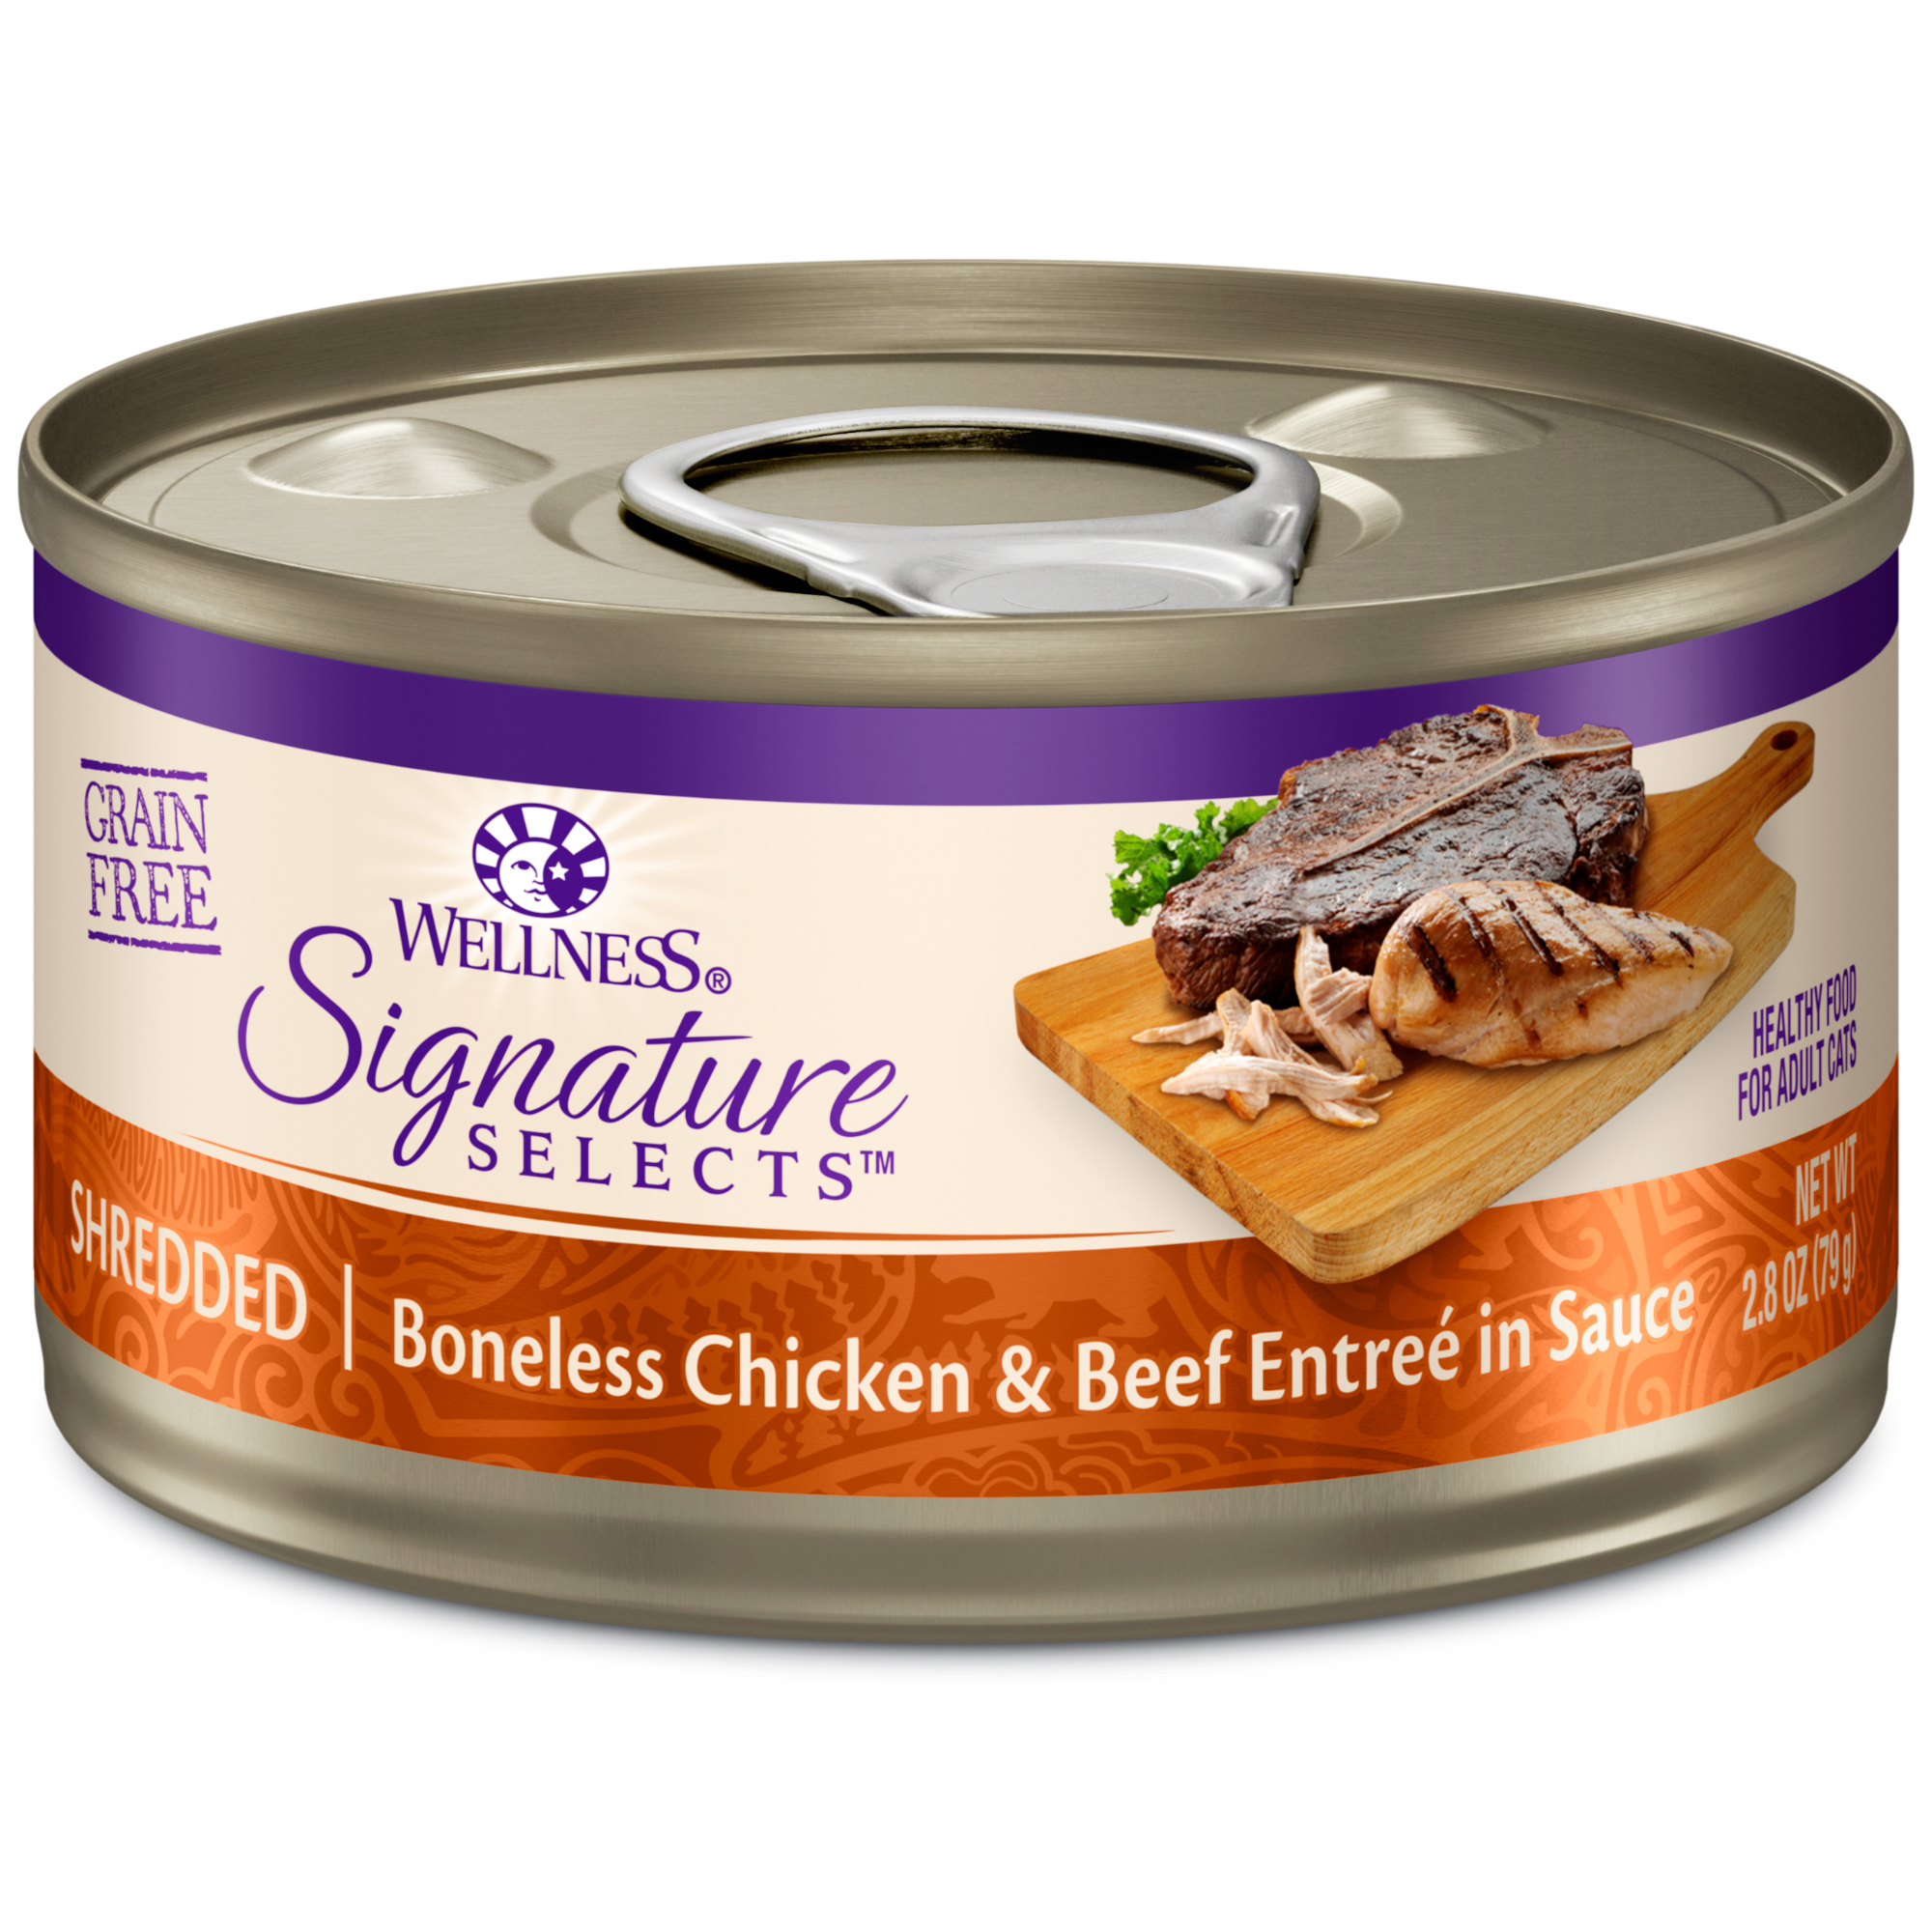 Wellness CORE Signature Selects Shredded Chicken & Beef Entree in Sauce